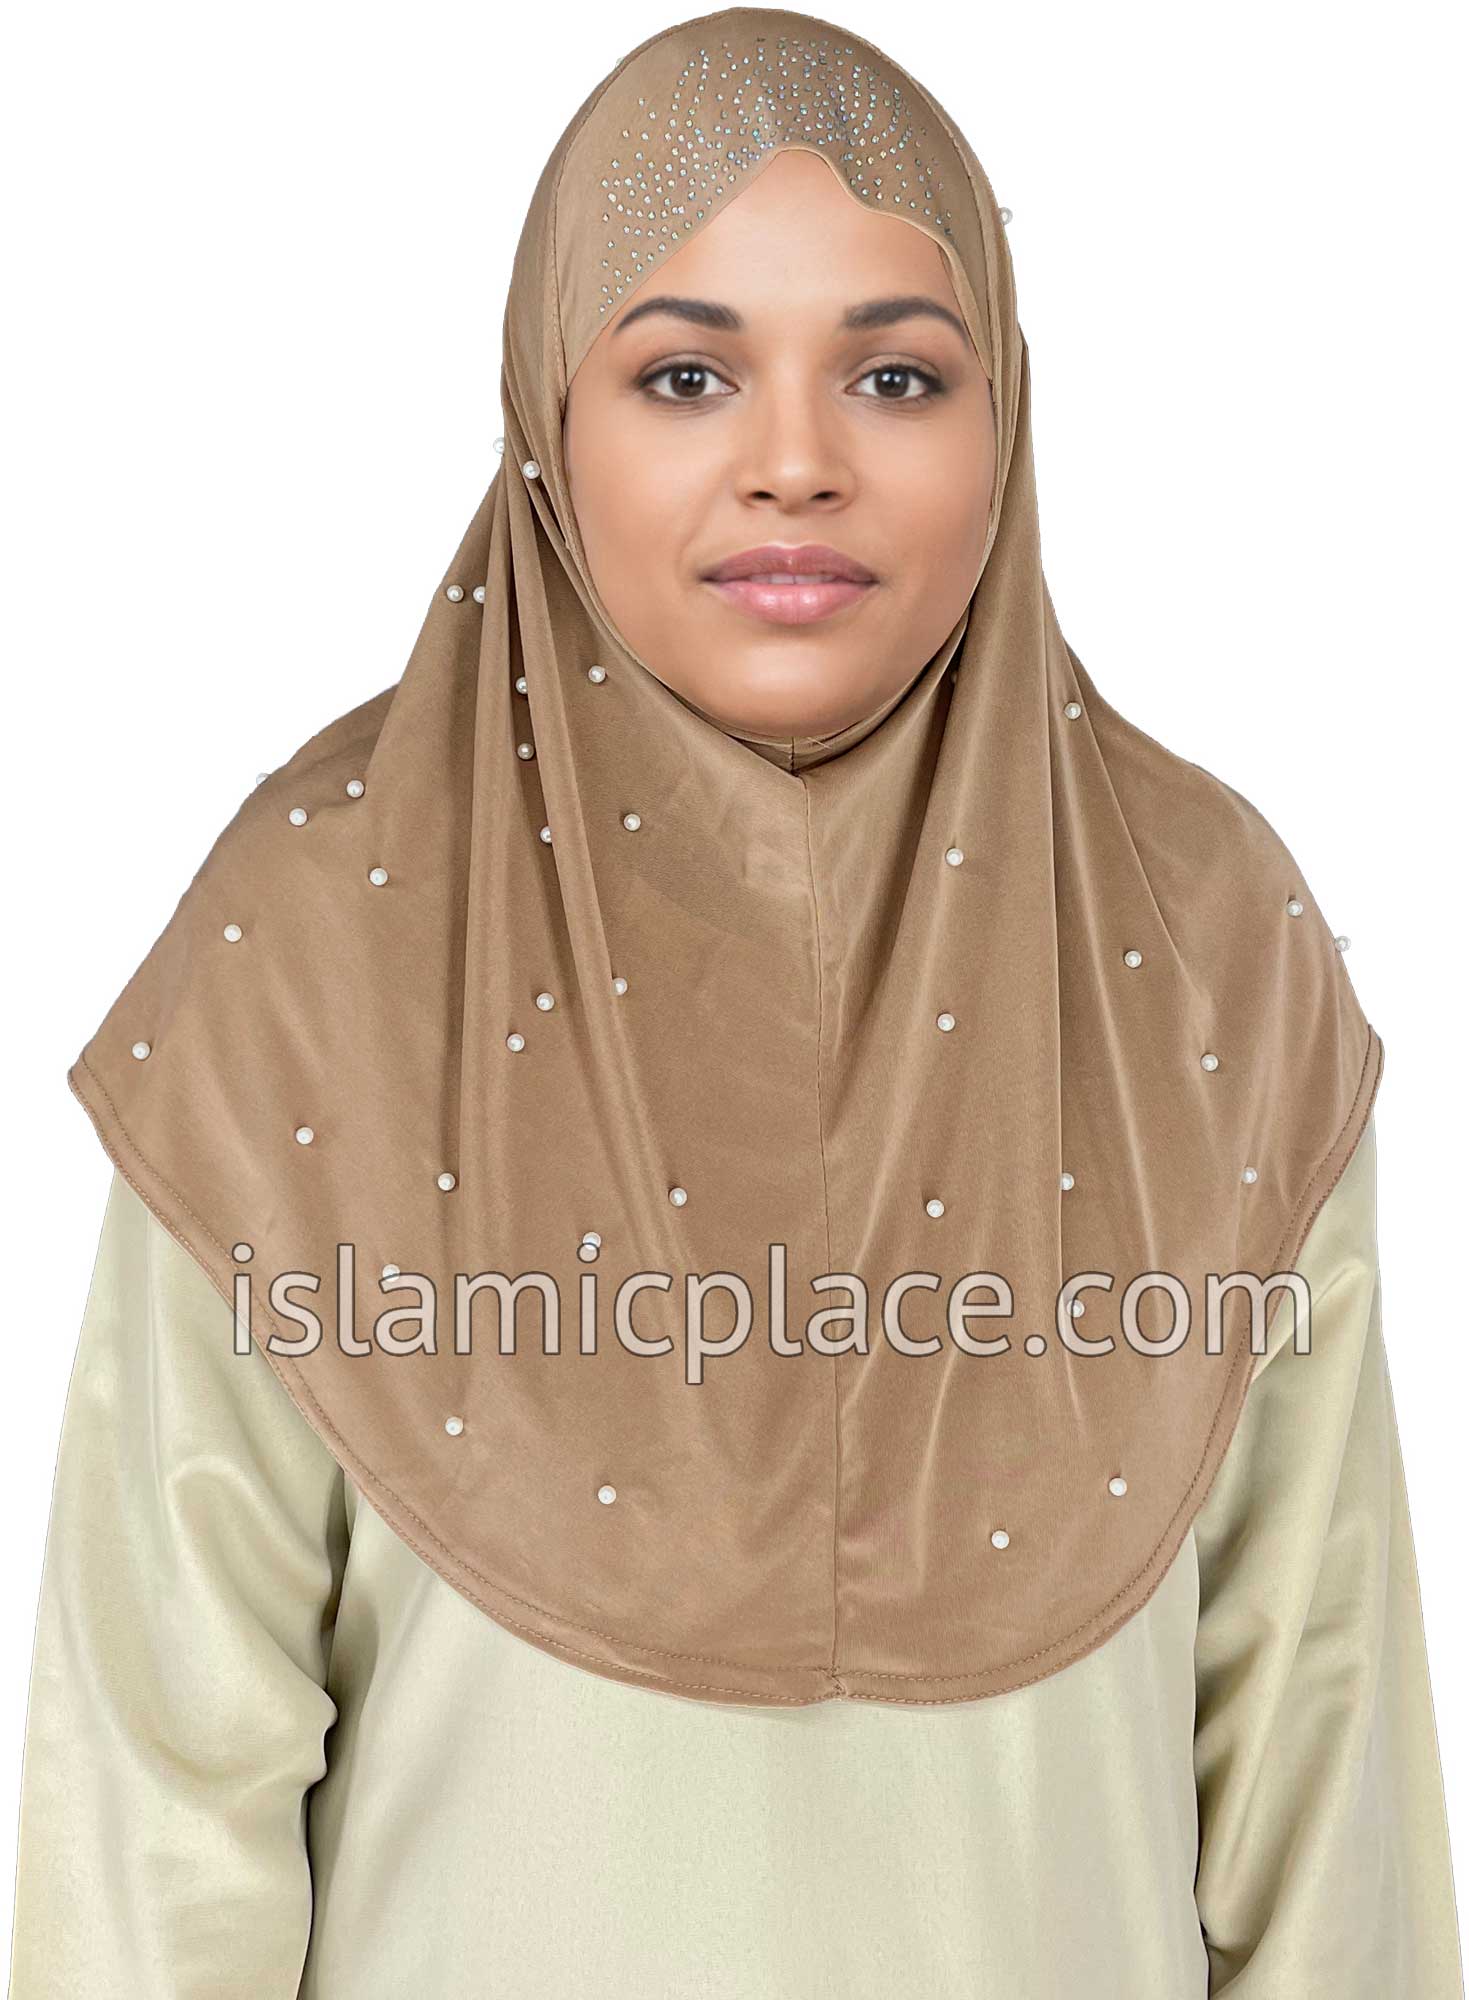 Oyster - Pearly with Rhinestones Teen to Adult (Large) Hijab Al-Amira (1-piece style) - Design 10